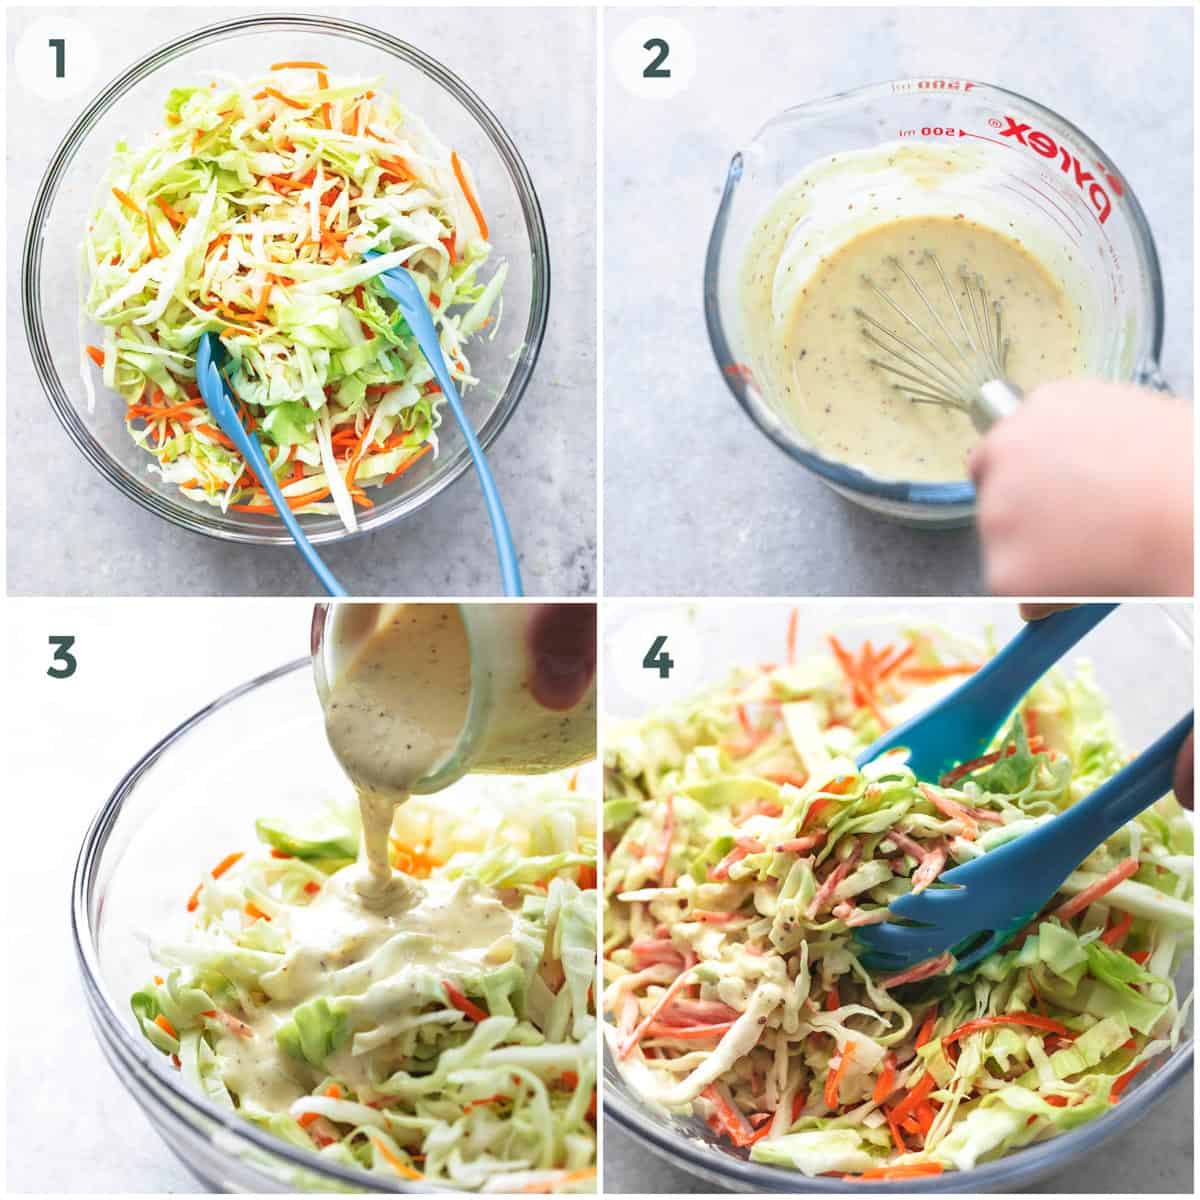 four images showing preparation of cole slaw